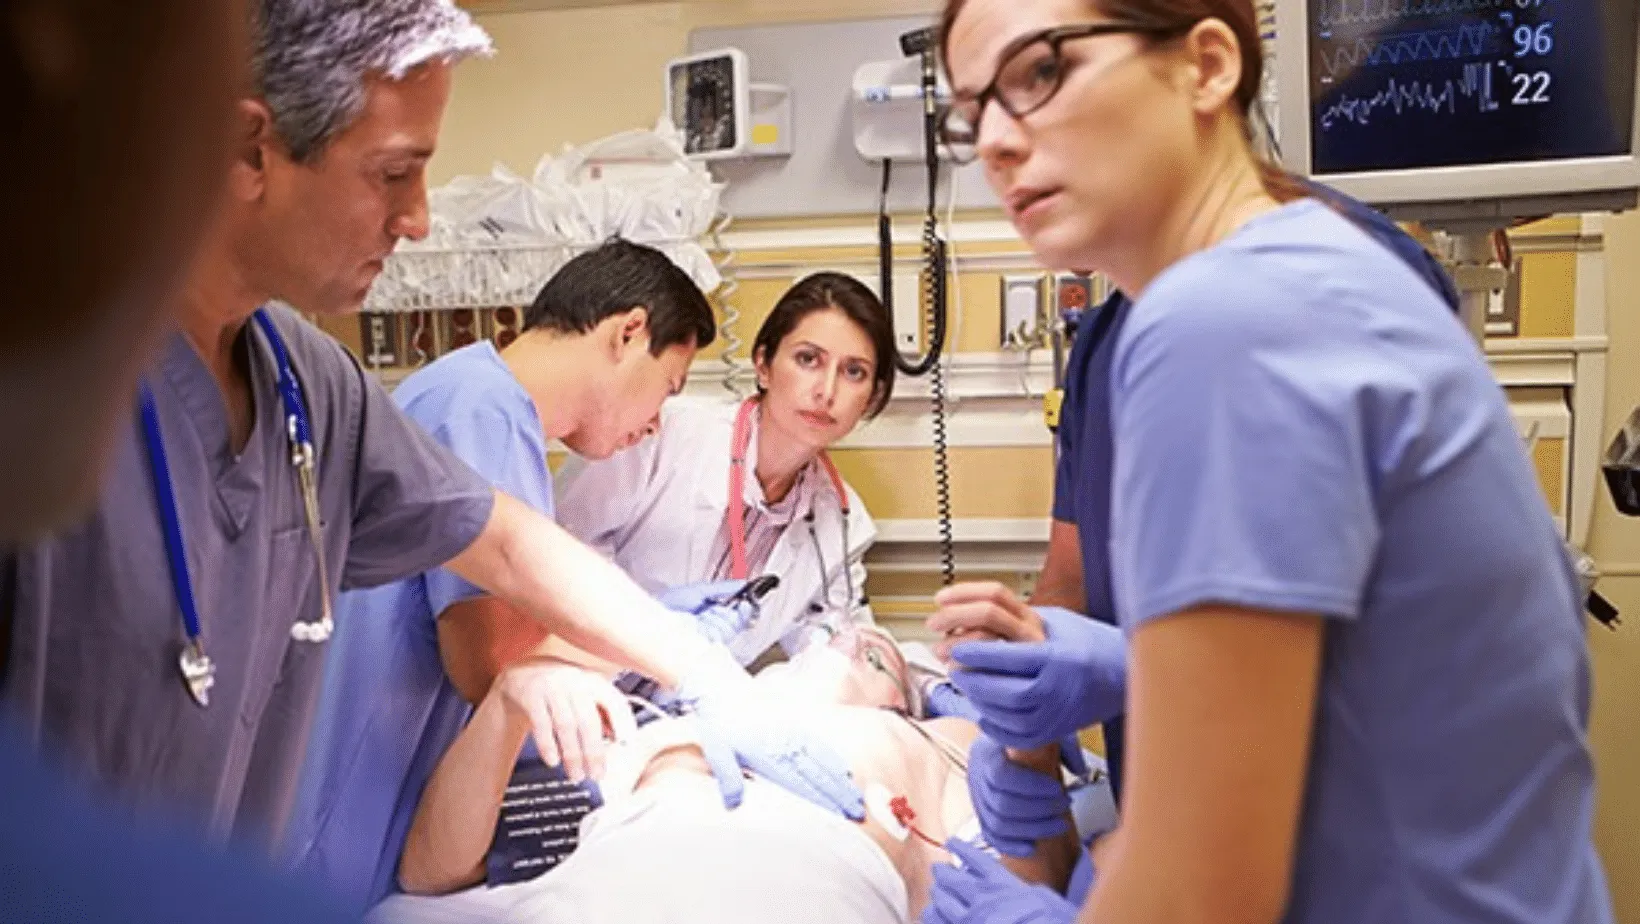 A team of medical professionals in scrubs and protective gear intently performing a procedure on a patient in an emergency room, with medical monitors in the background.